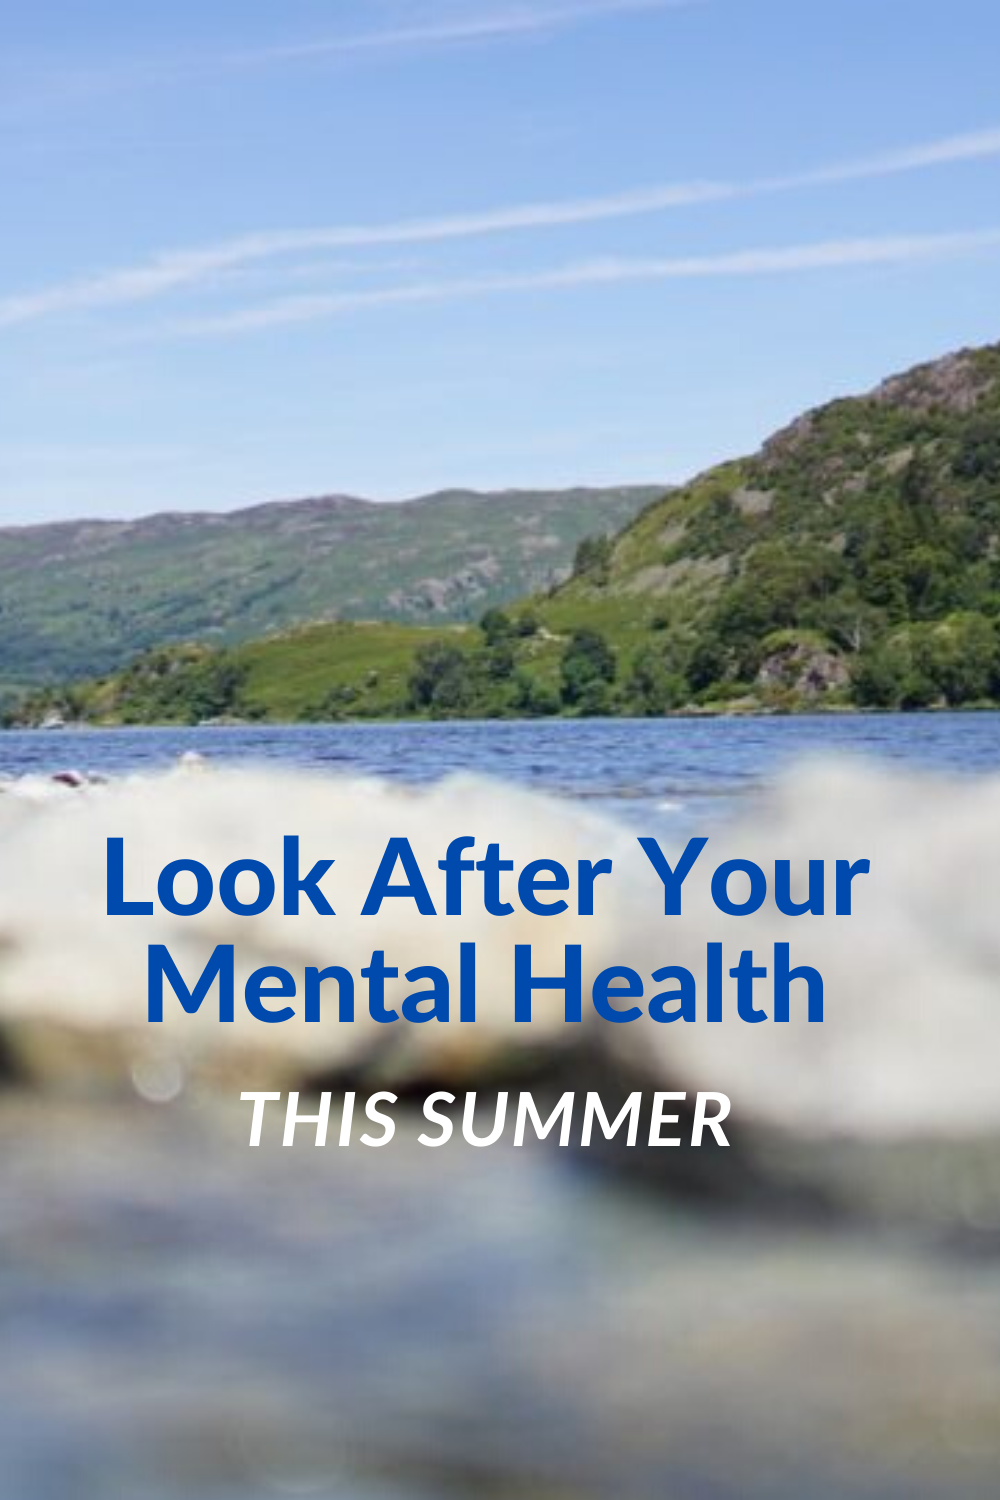 Look after your mental health this summer